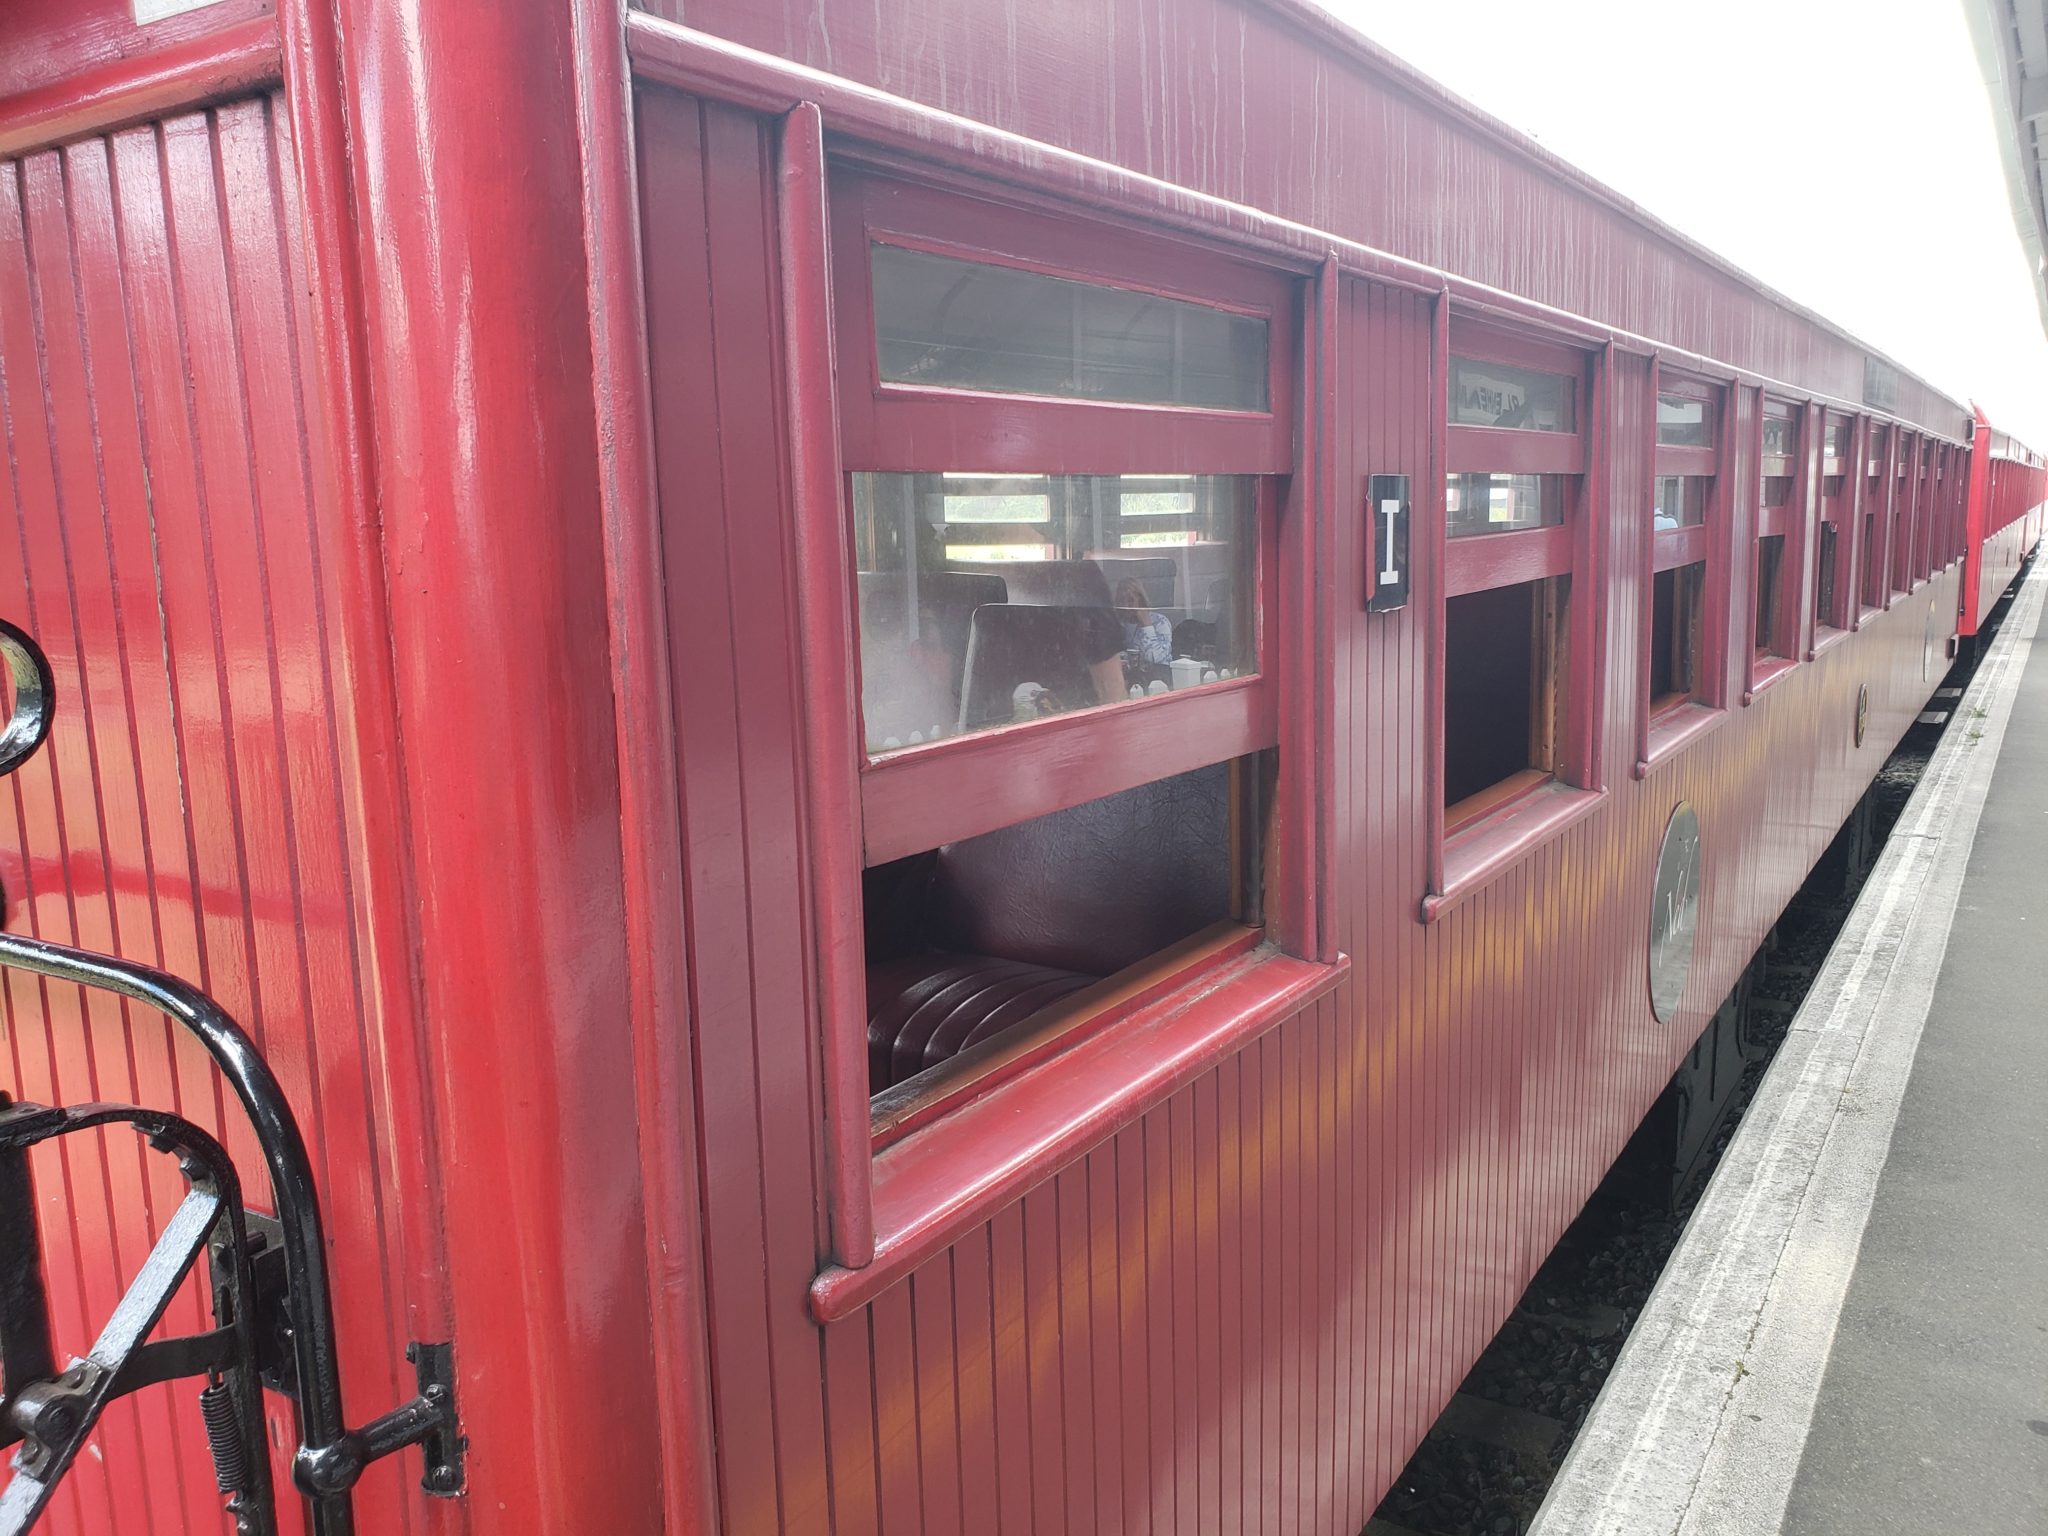 a red train car with windows